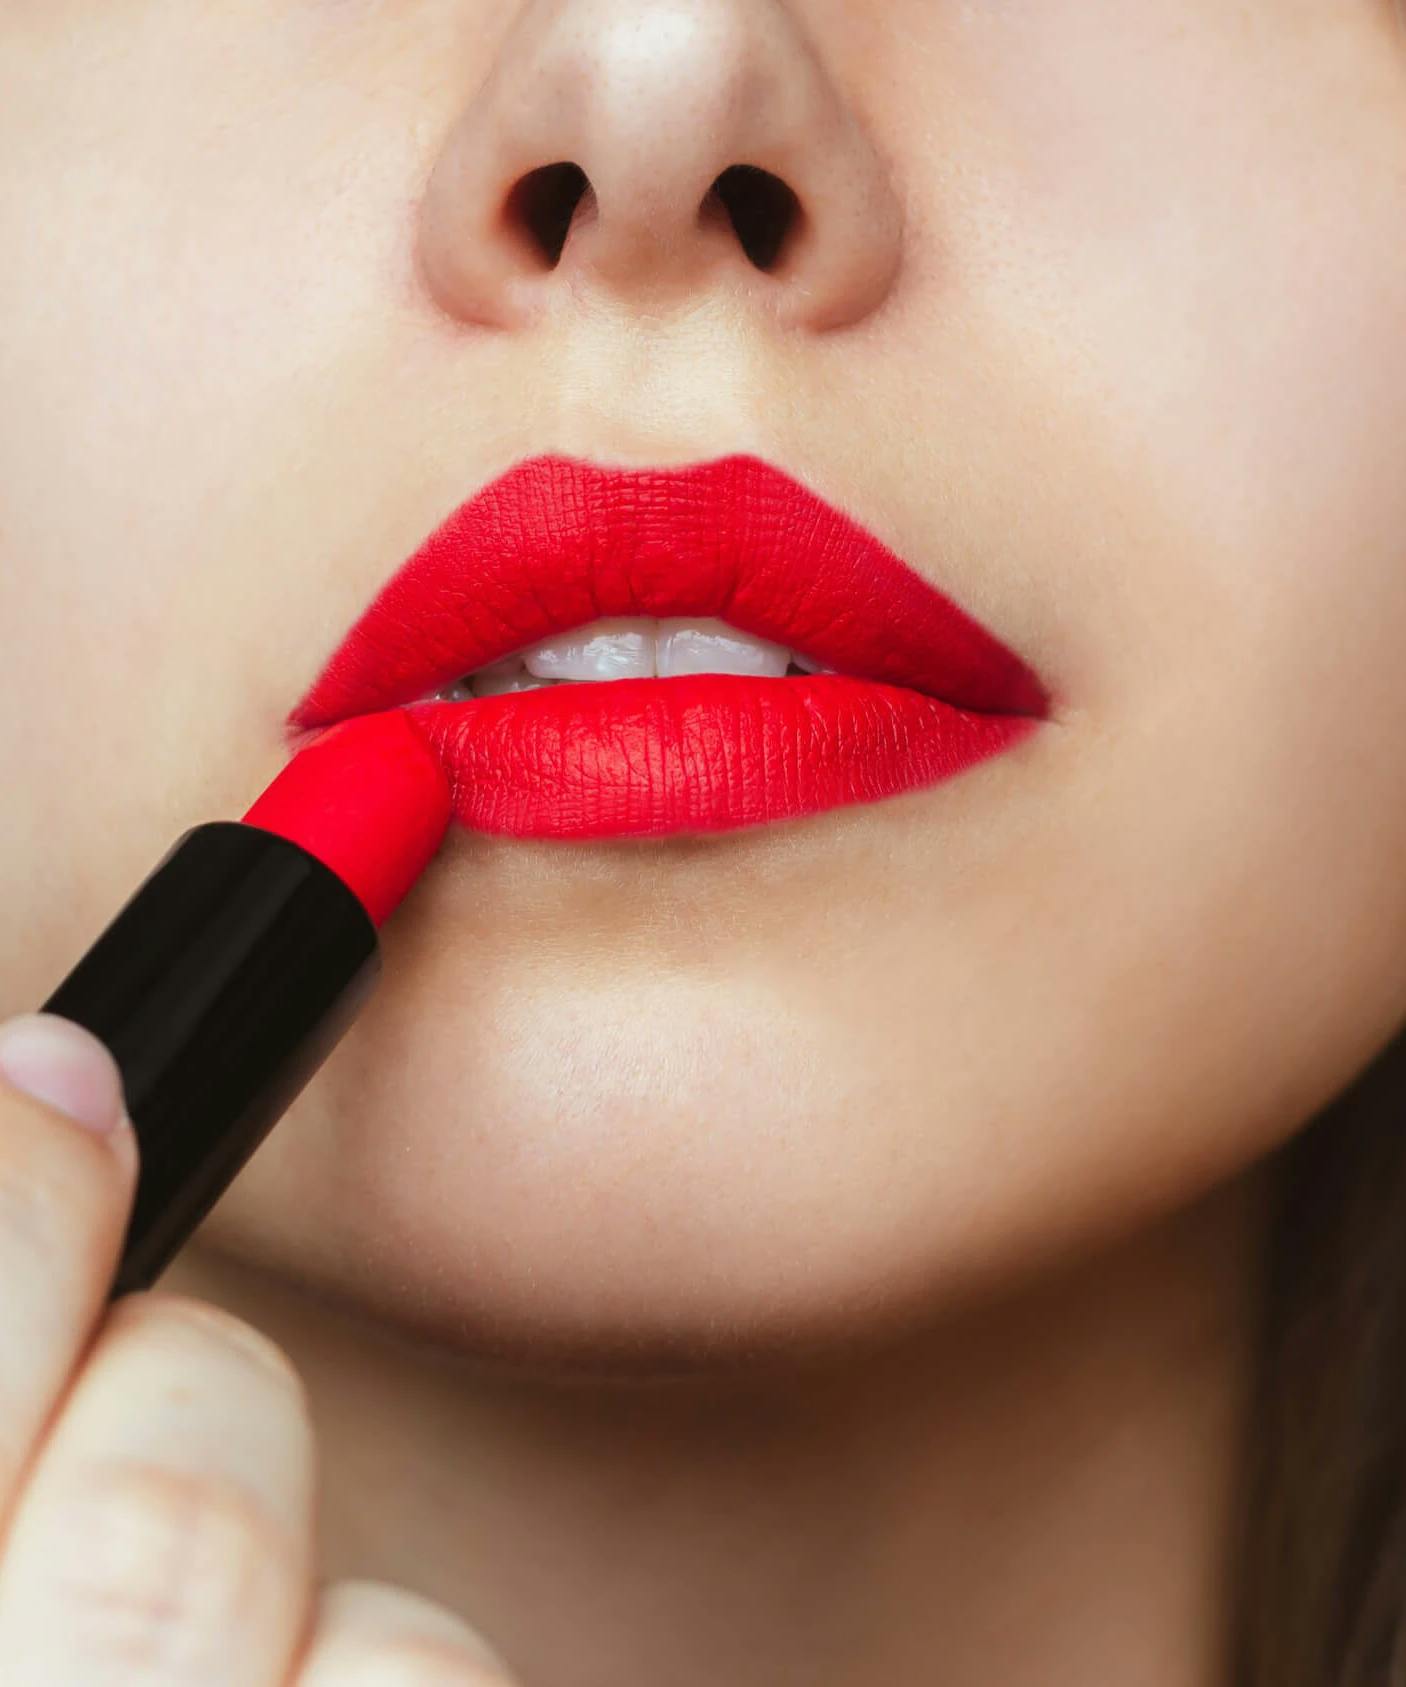 Hormone-Disrupting Phthalates Are Everywhere From Your Makeup To Fast Food shutterstock